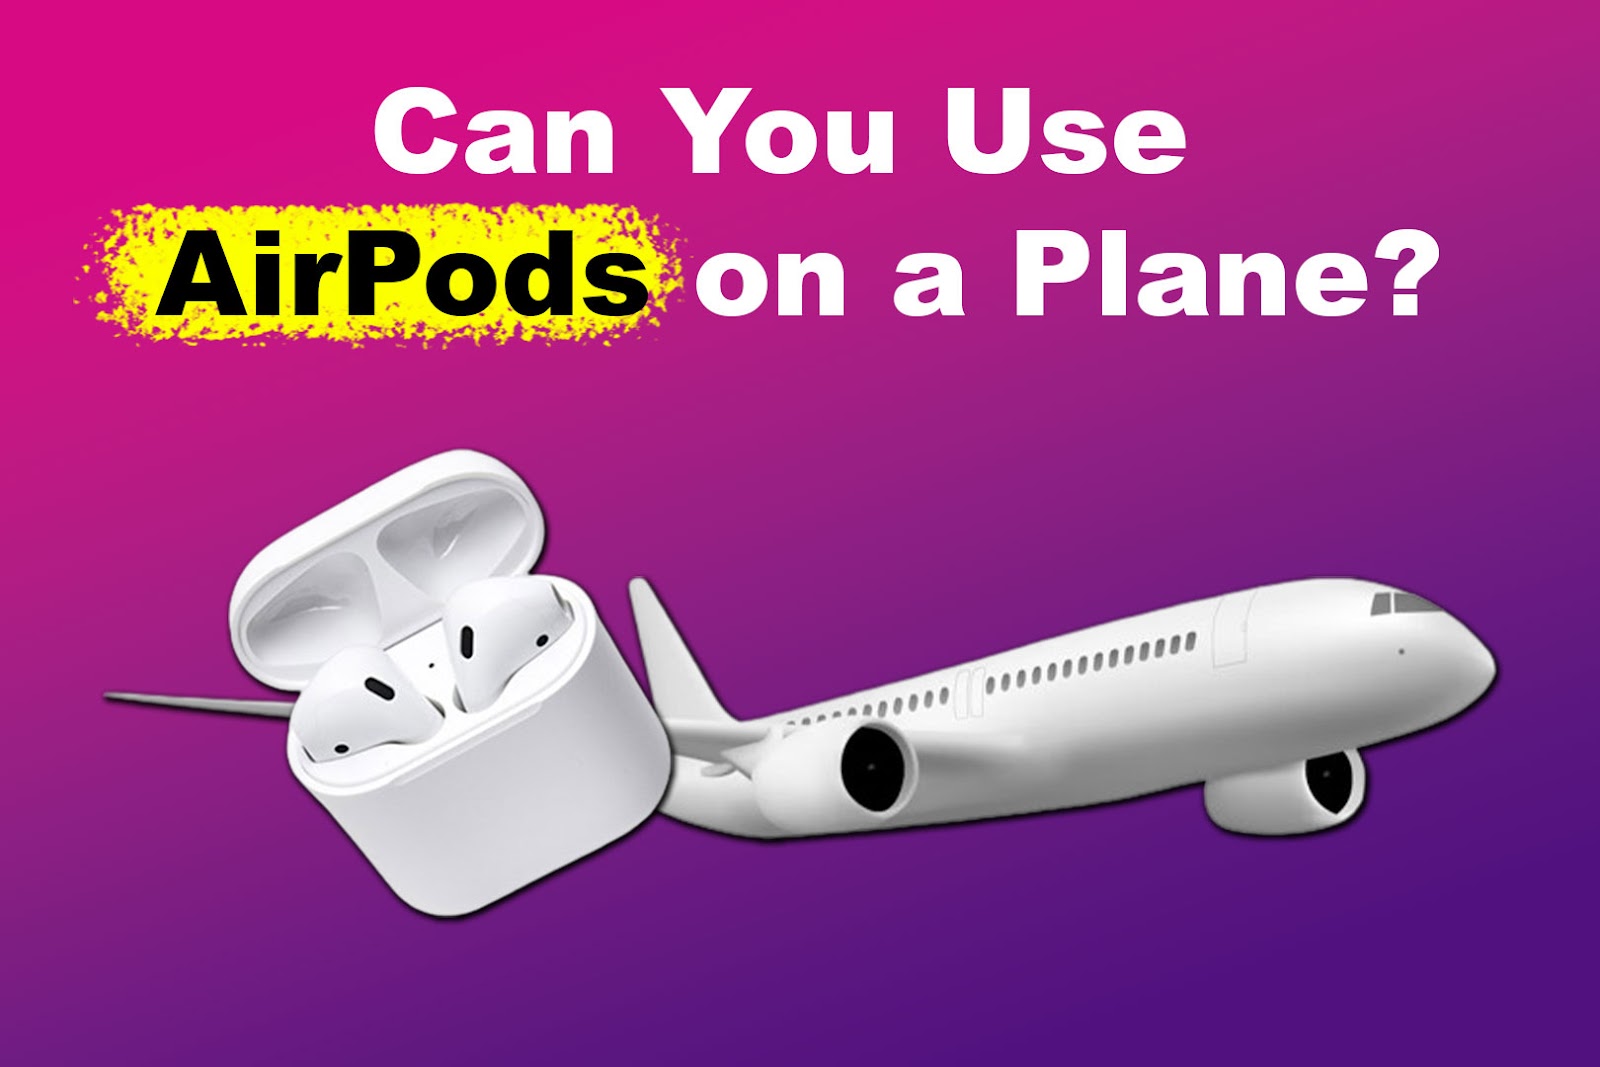 Can You Use Your AirPods on a Plane? [Yes! Find Out How]